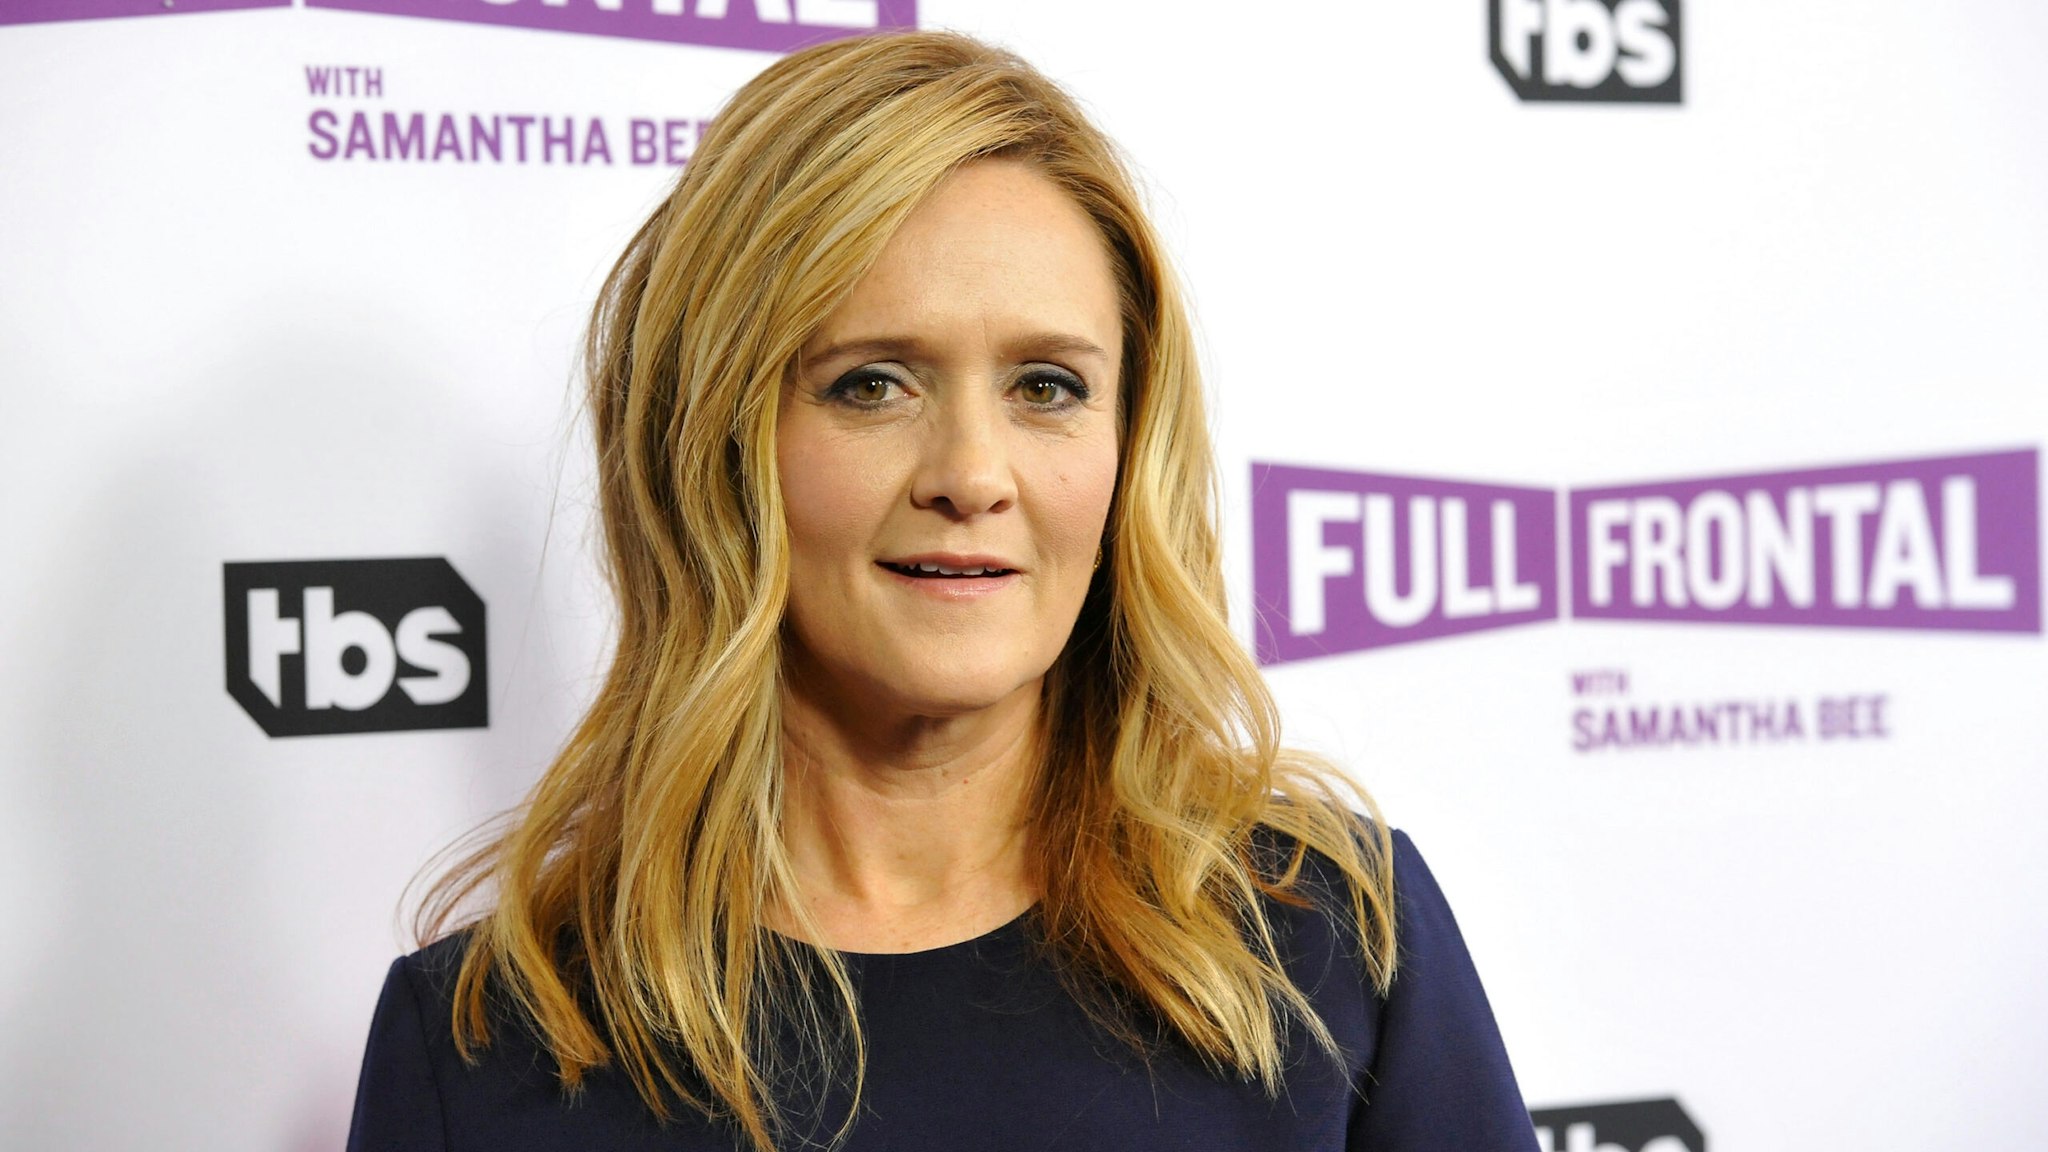 BEVERLY HILLS, CA - MAY 23: TV personality Samantha Bee attends TBS' For Your Consideration event for "Full Frontal With Samantha Bee" at Samuel Goldwyn Theater on May 23, 2017 in Beverly Hills, California.